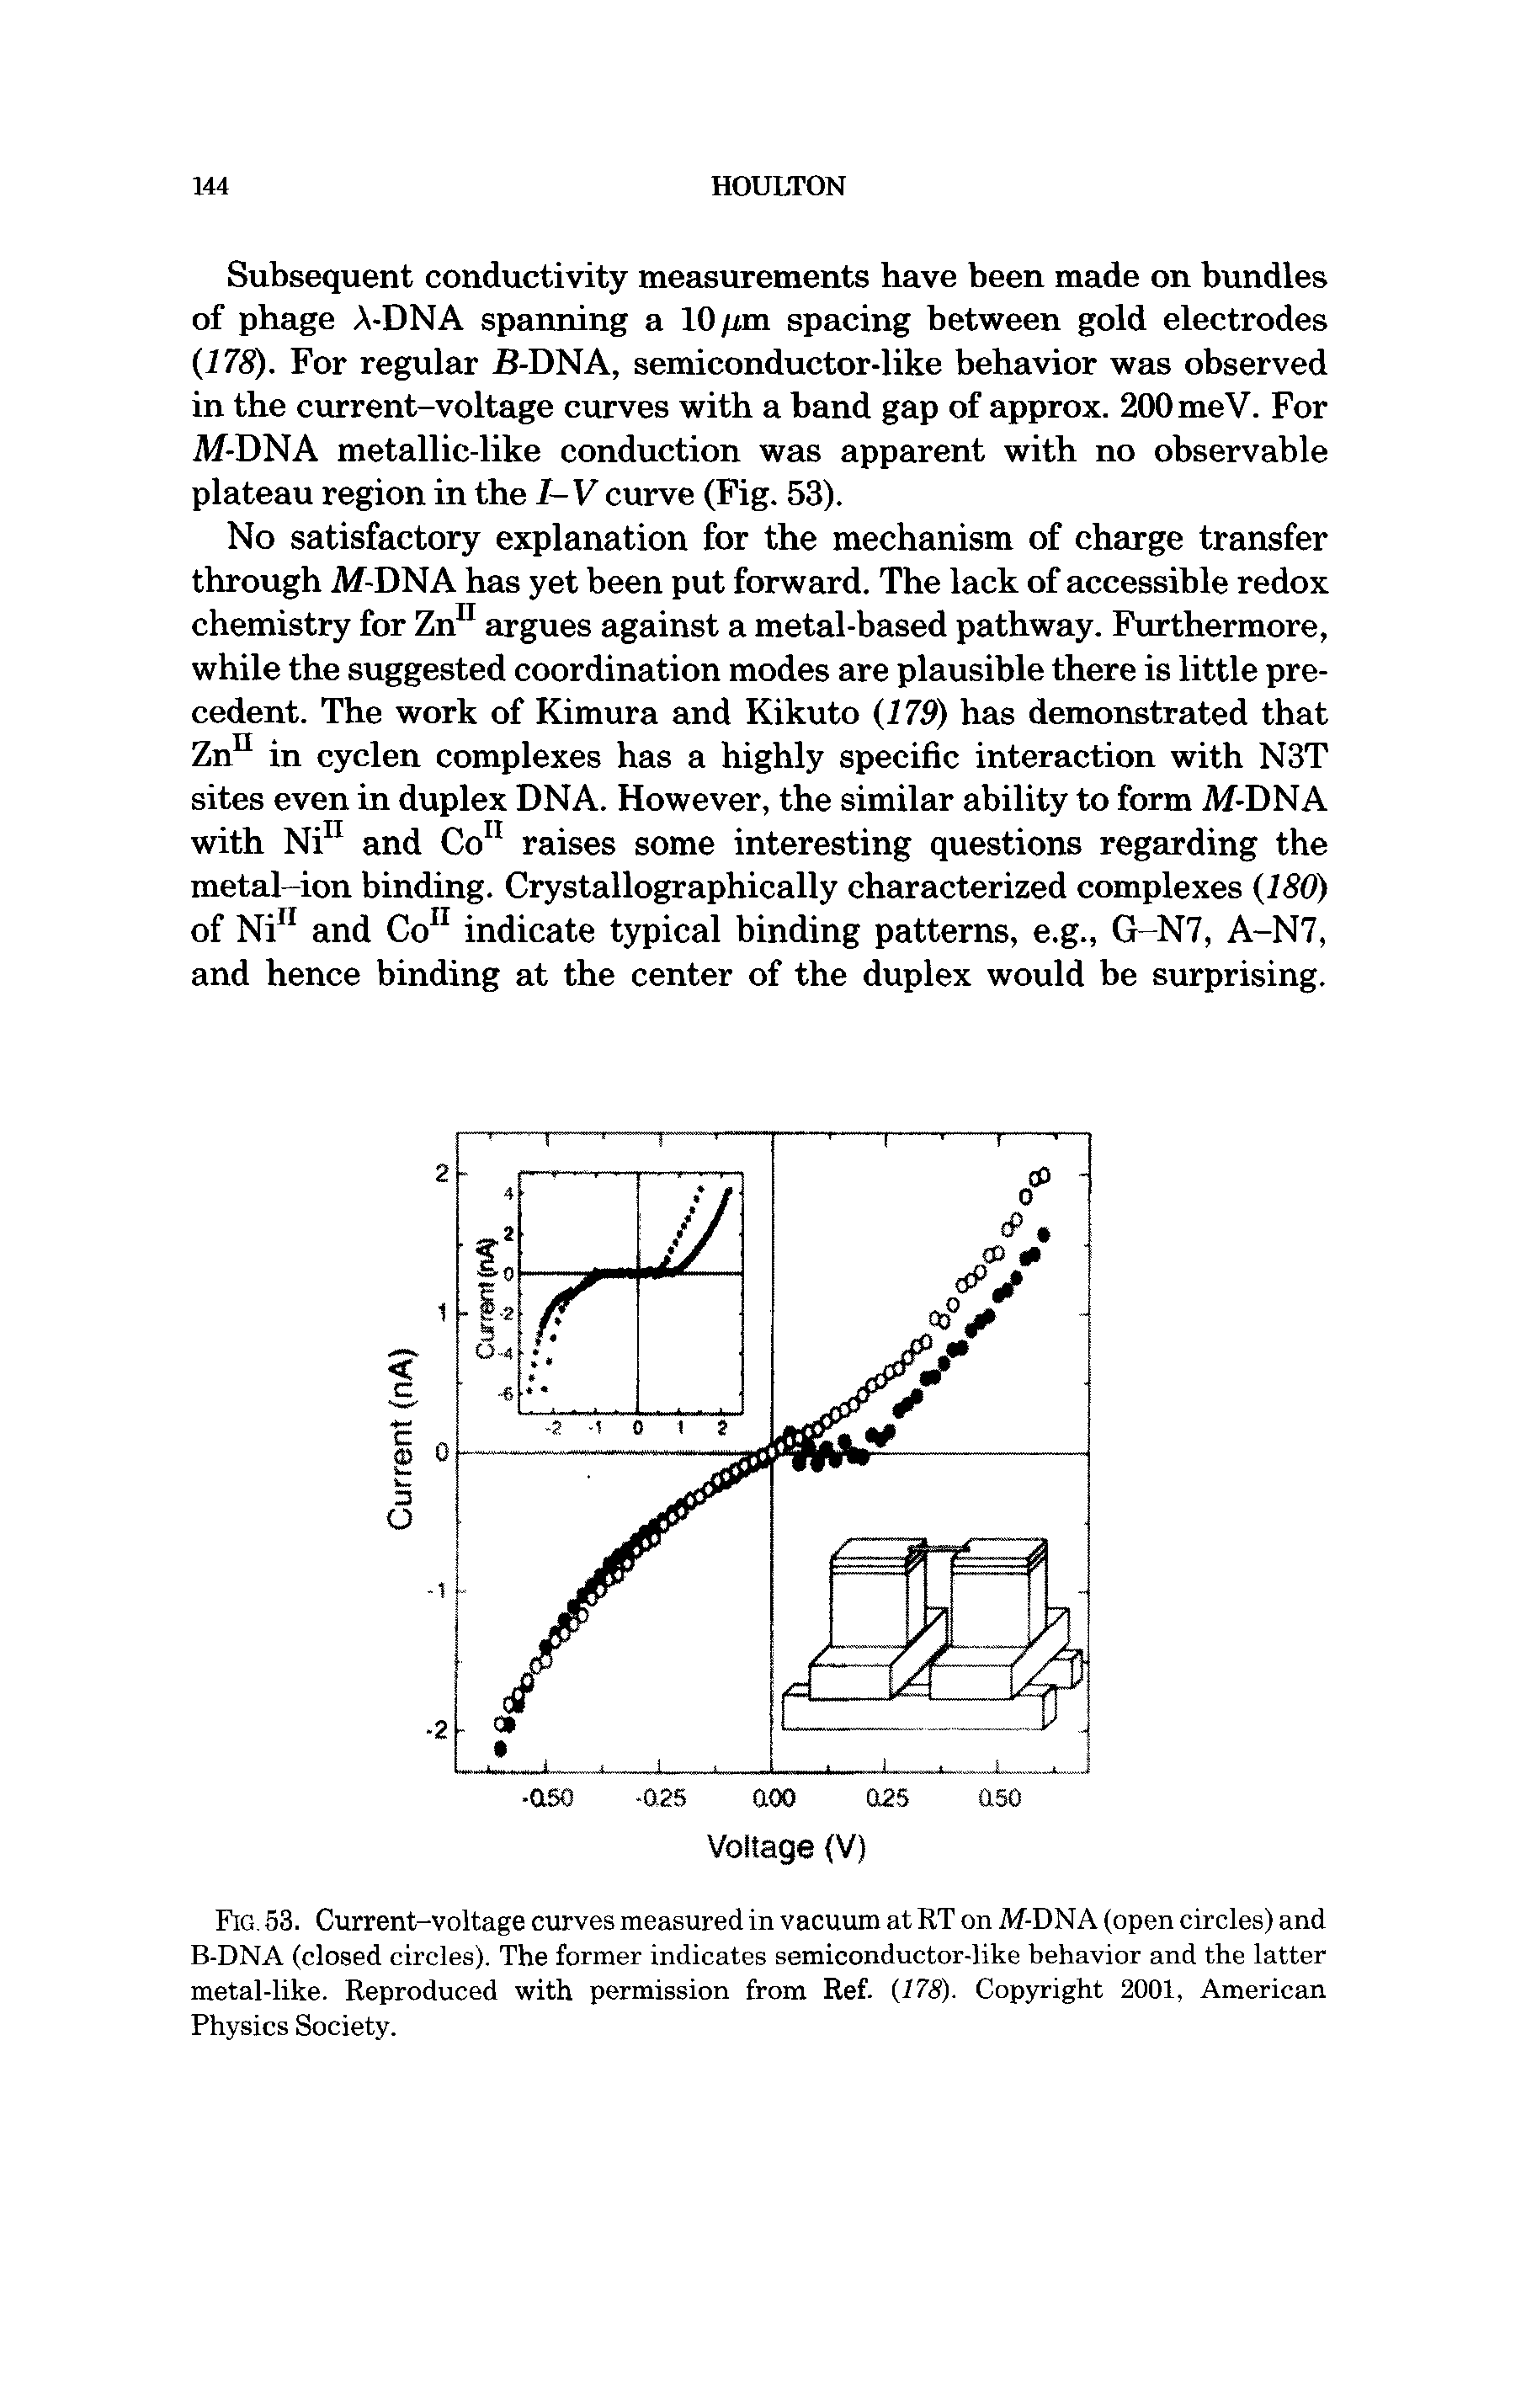 Fig. 53. Current-voltage curves measured in vacuum at RT on M-DNA (open circles) and B-DNA (closed circles). The former indicates semiconductor-like behavior and the latter metal-like. Reproduced with permission from Ref. (178). Copyright 2001, American Physics Society.